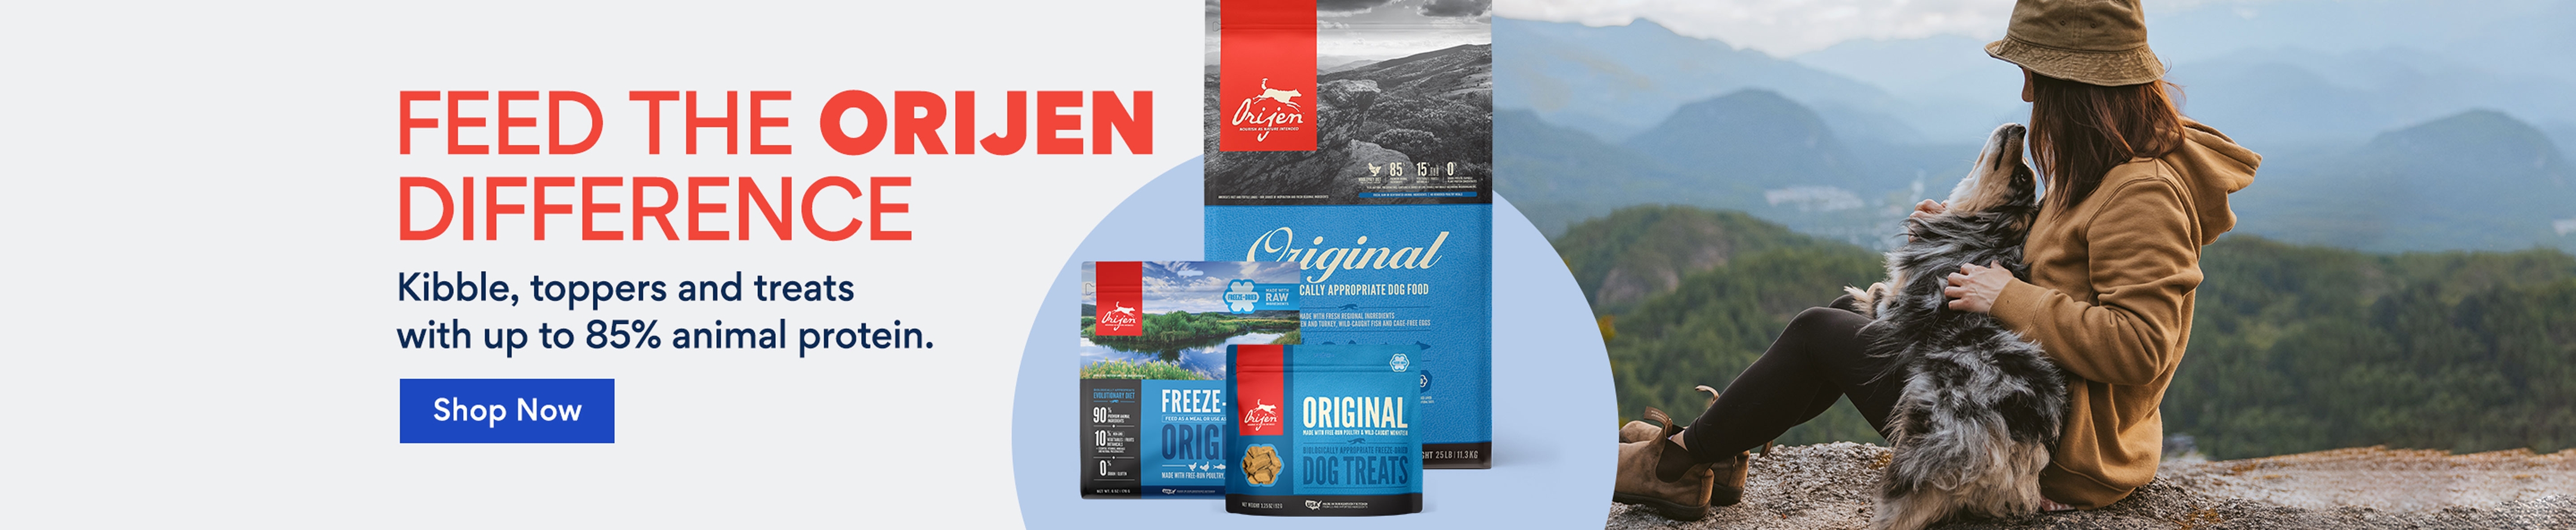 feed the orijen difference. Kibble, toppers, and treats with up to 85% animal protein.